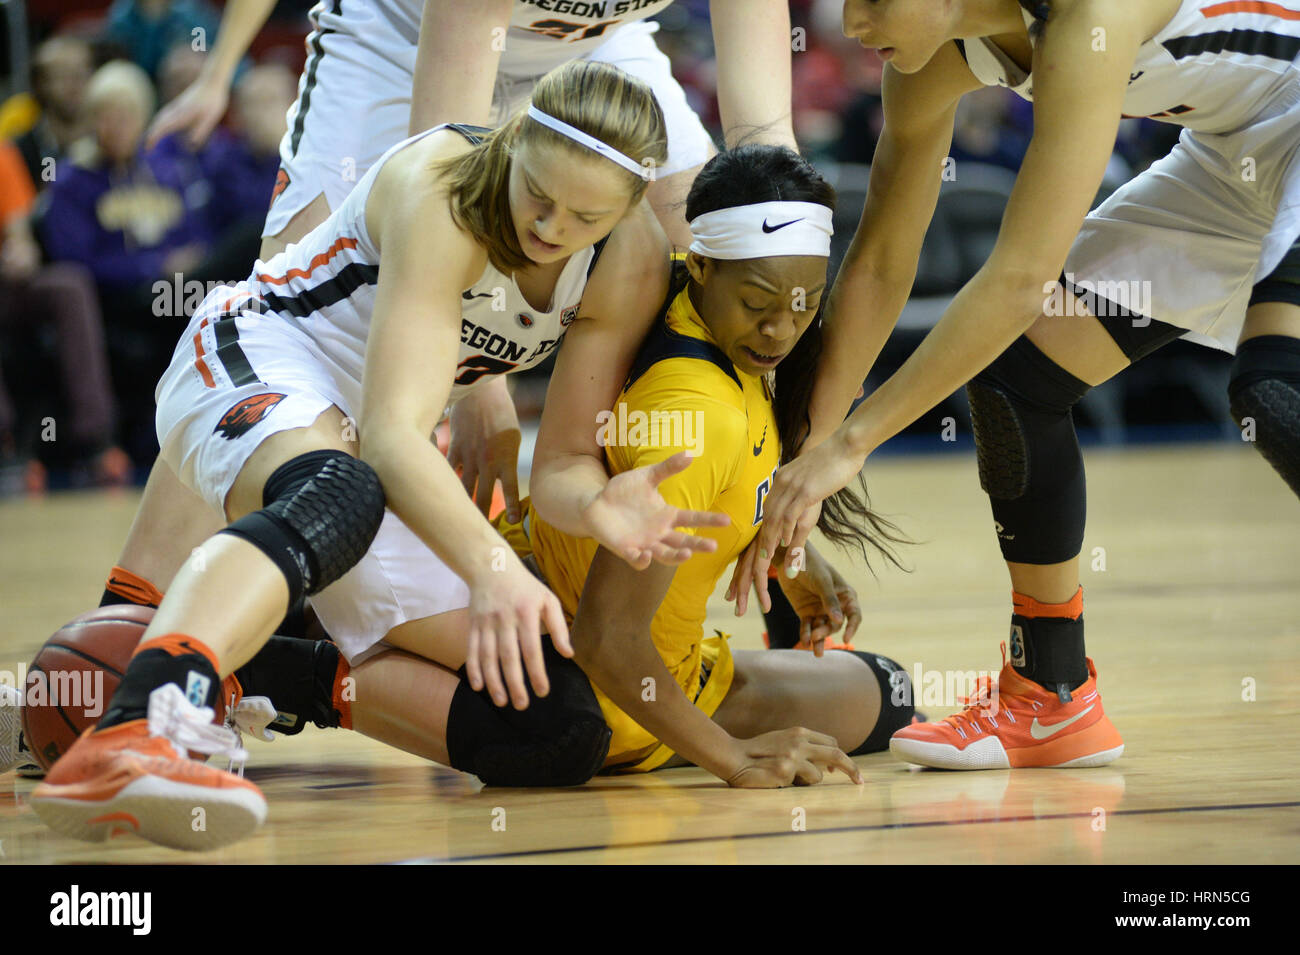 Seattle, WA, USA. 3rd Mar, 2017. OSU's Mikayla Pivec (0) and Cal's Ki'Cole Cayton (21) scramble for a loose ball during a PAC12 women's tournament game between the Oregon State Beavers and the Cal Bears. The game was played at Key Arena in Seattle, WA. Jeff Halstead/CSM/Alamy Live News Stock Photo